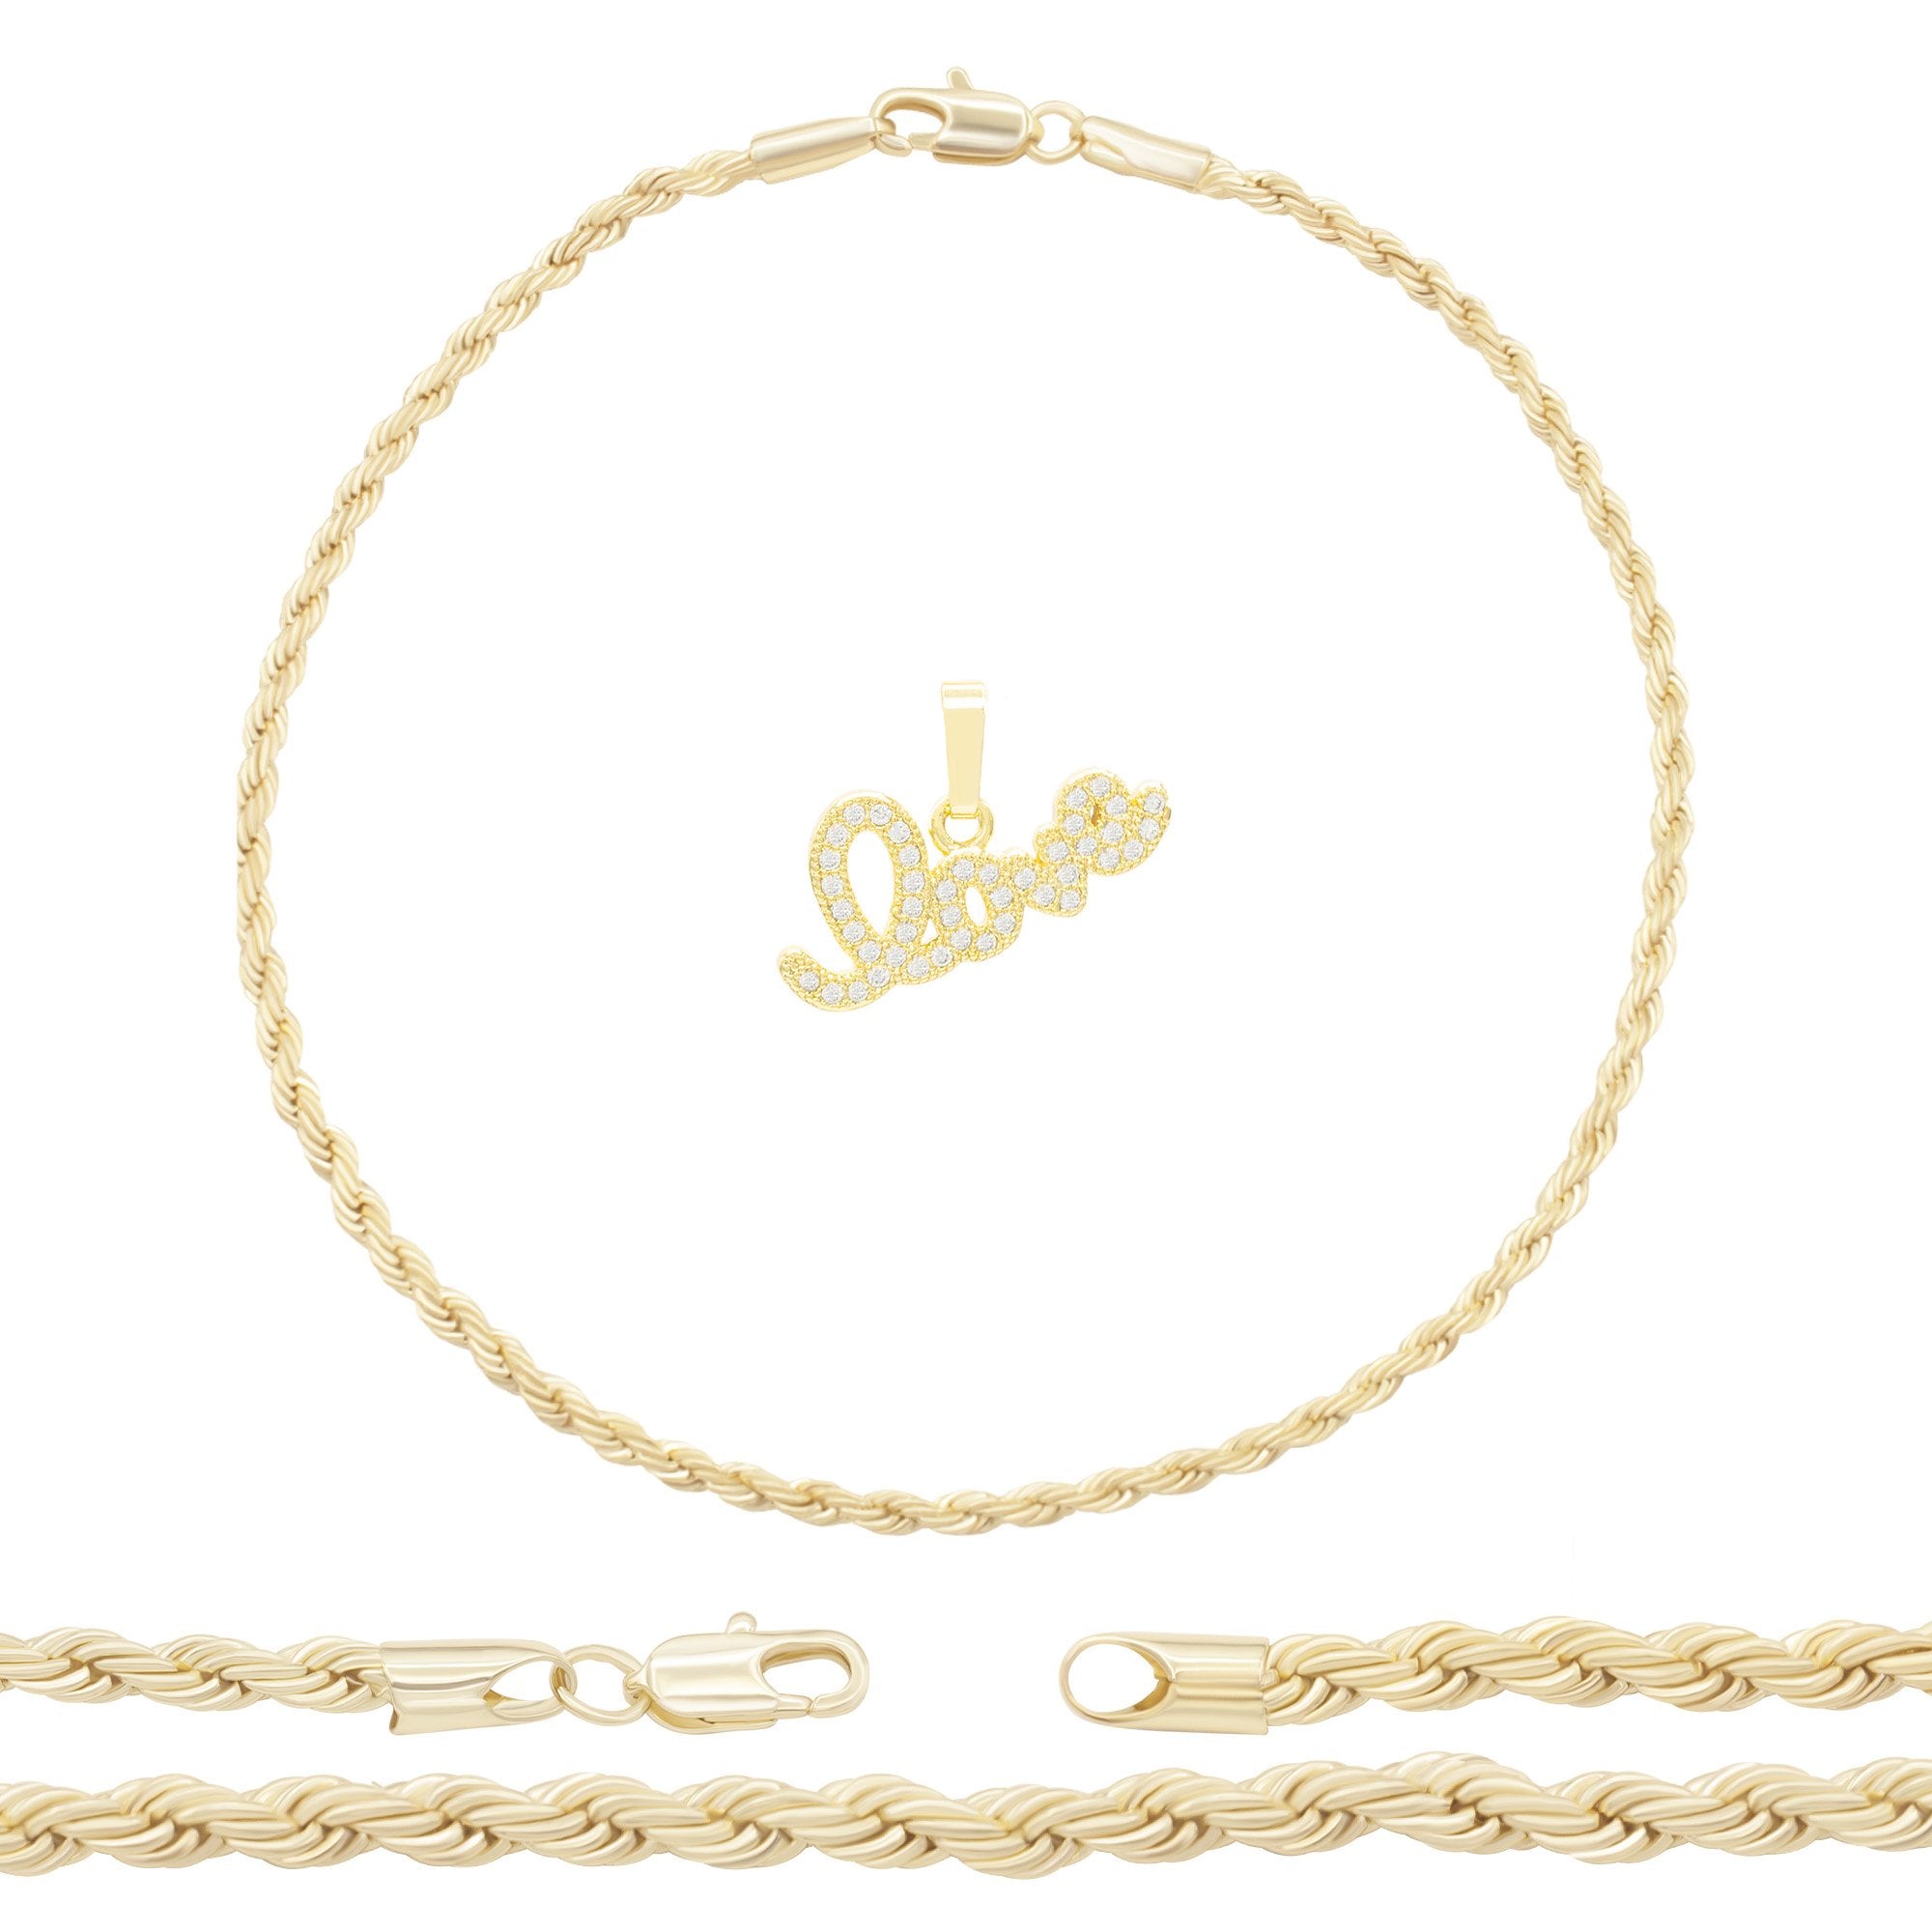 Love 2 Pendant 14K Anklet Gold Filled Cubic Zirconia Charm Rope Chain Set 10" Women Jewelry